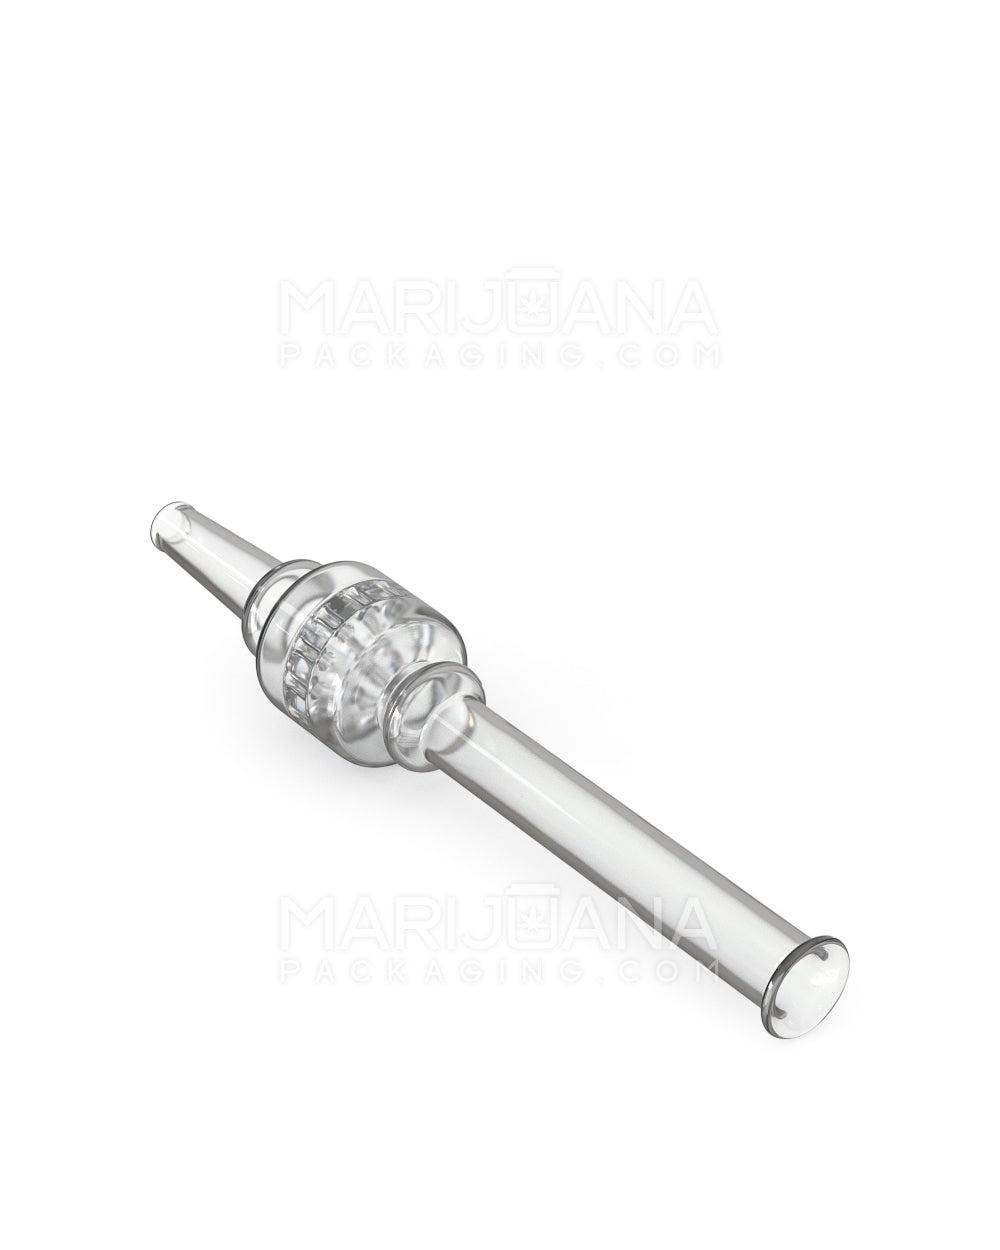 Honeycomb Percolator Dab Straw | 6in Long - Glass - Clear - 6